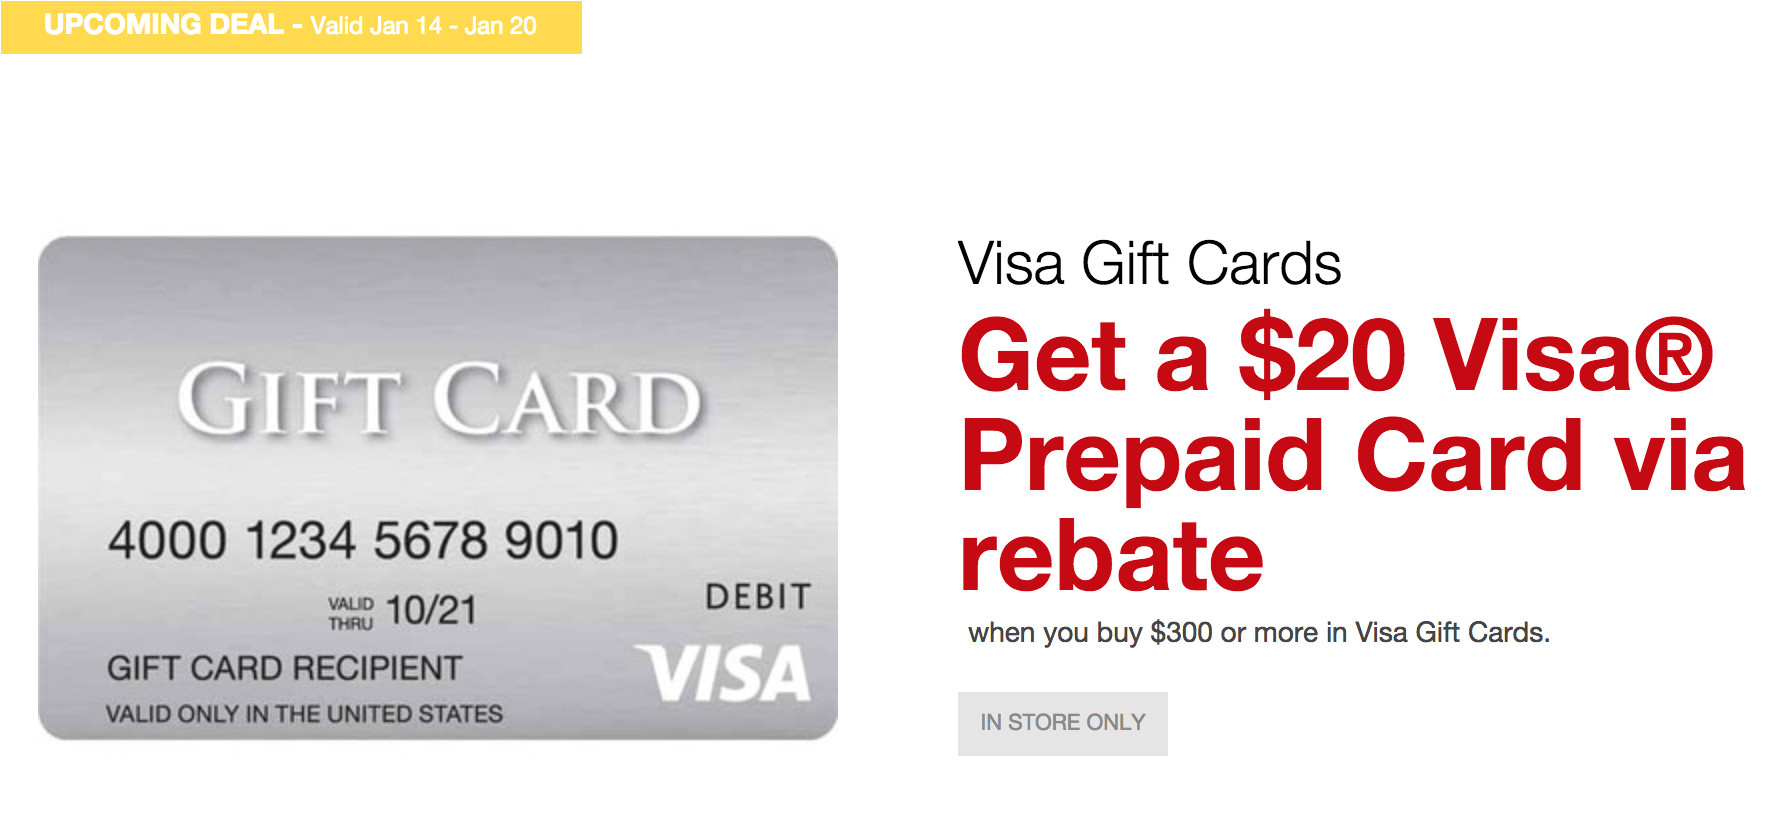 Comenity Bank Pre Approved Credit Cards Expired now Live Staples Get 20 Visa Rebate with 300 In Visa